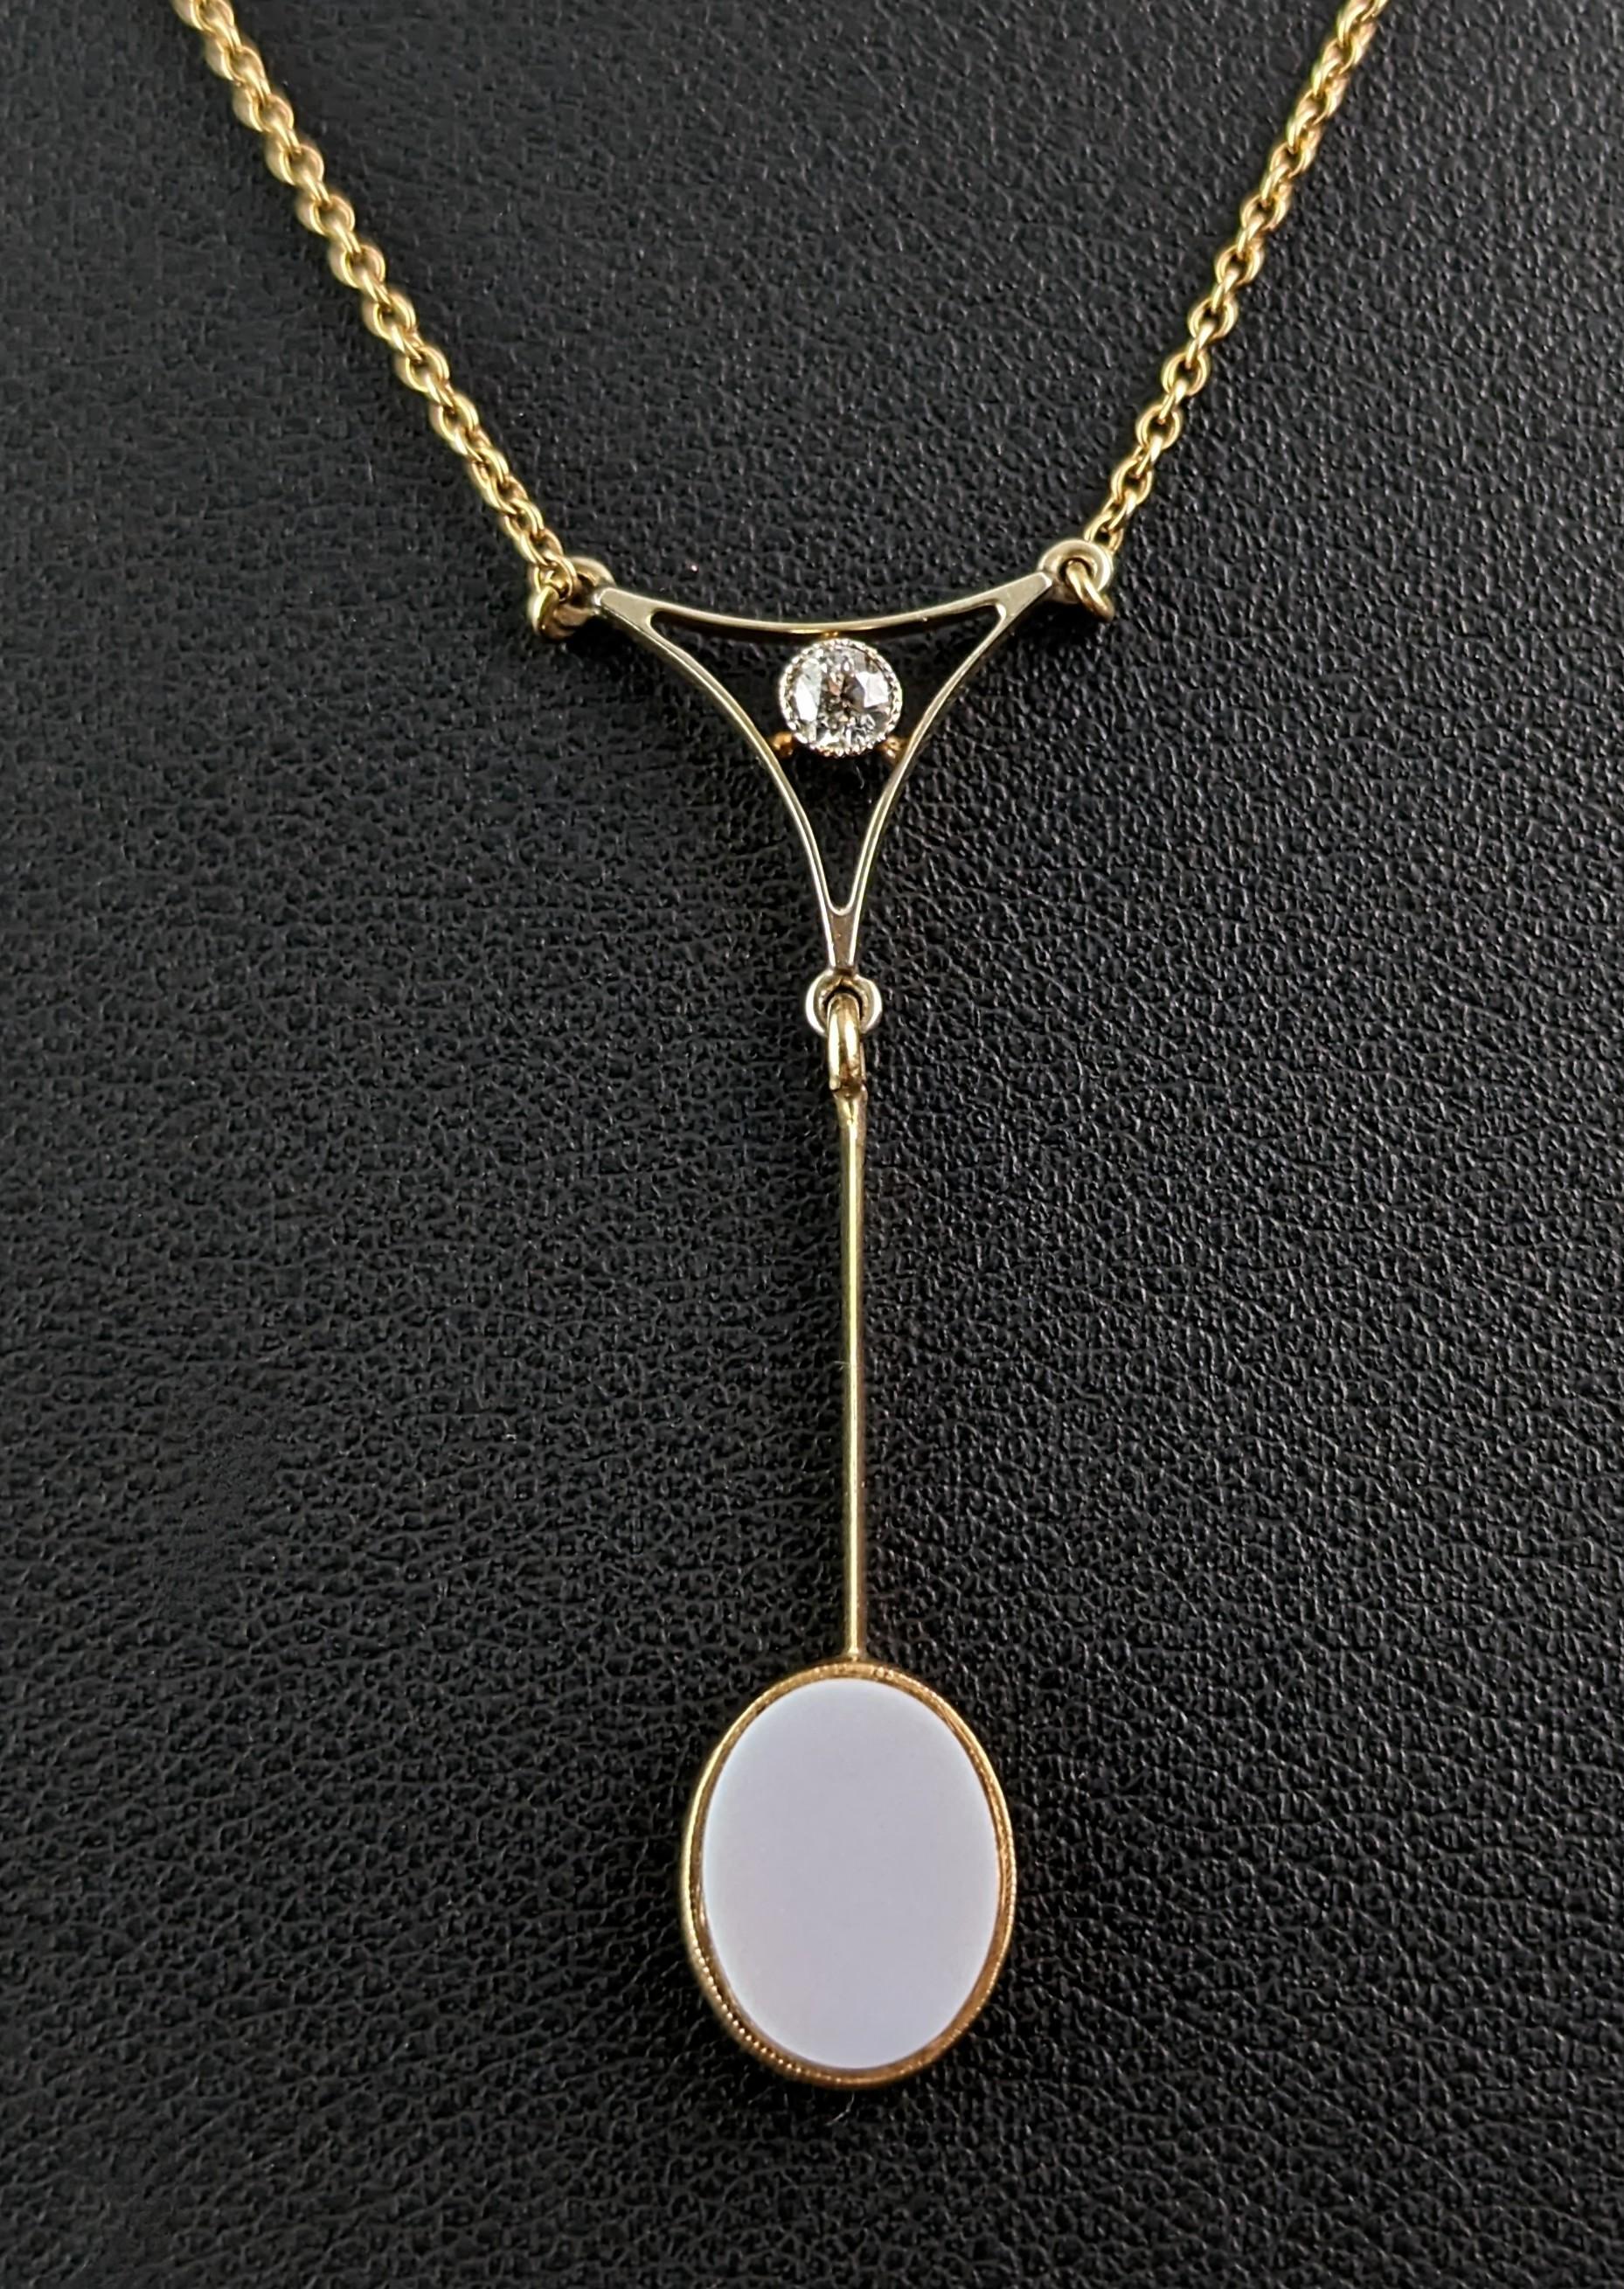 This beautiful Antique Art Deco 9ct yellow gold, Diamond and Sardonyx drop pendant necklace is so feminine and unusual.

The pendant has a single old cut diamond to the top in a fancy geometric style triangle intercepted by a gold bar drop, from